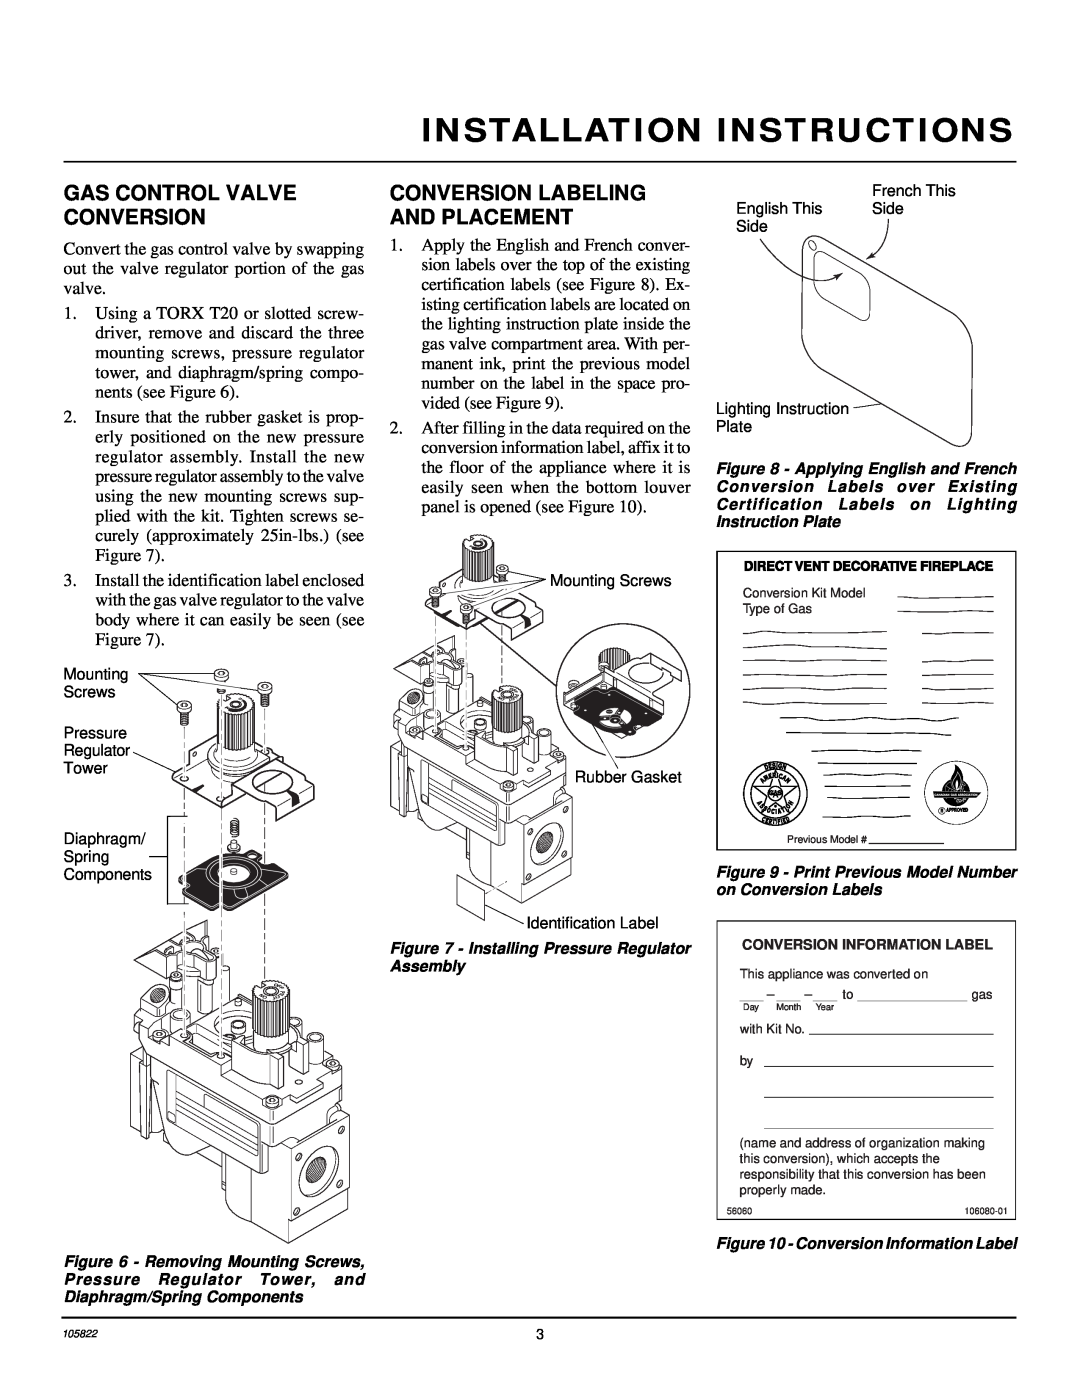 Desa 105801-09, 106040-02 Installation Instructions, Gas Control Valve Conversion, Conversion Labeling And Placement 